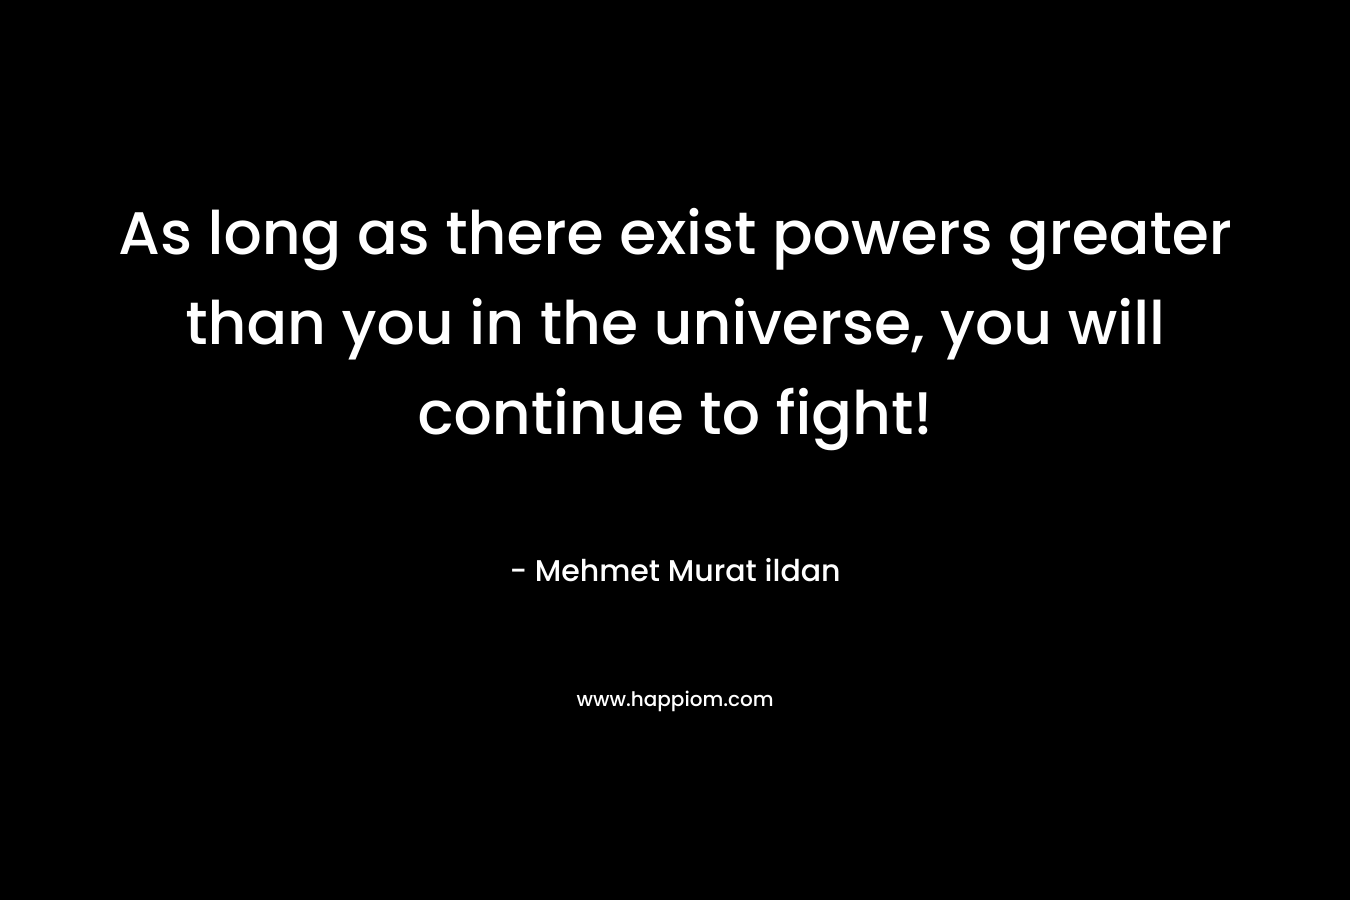 As long as there exist powers greater than you in the universe, you will continue to fight!